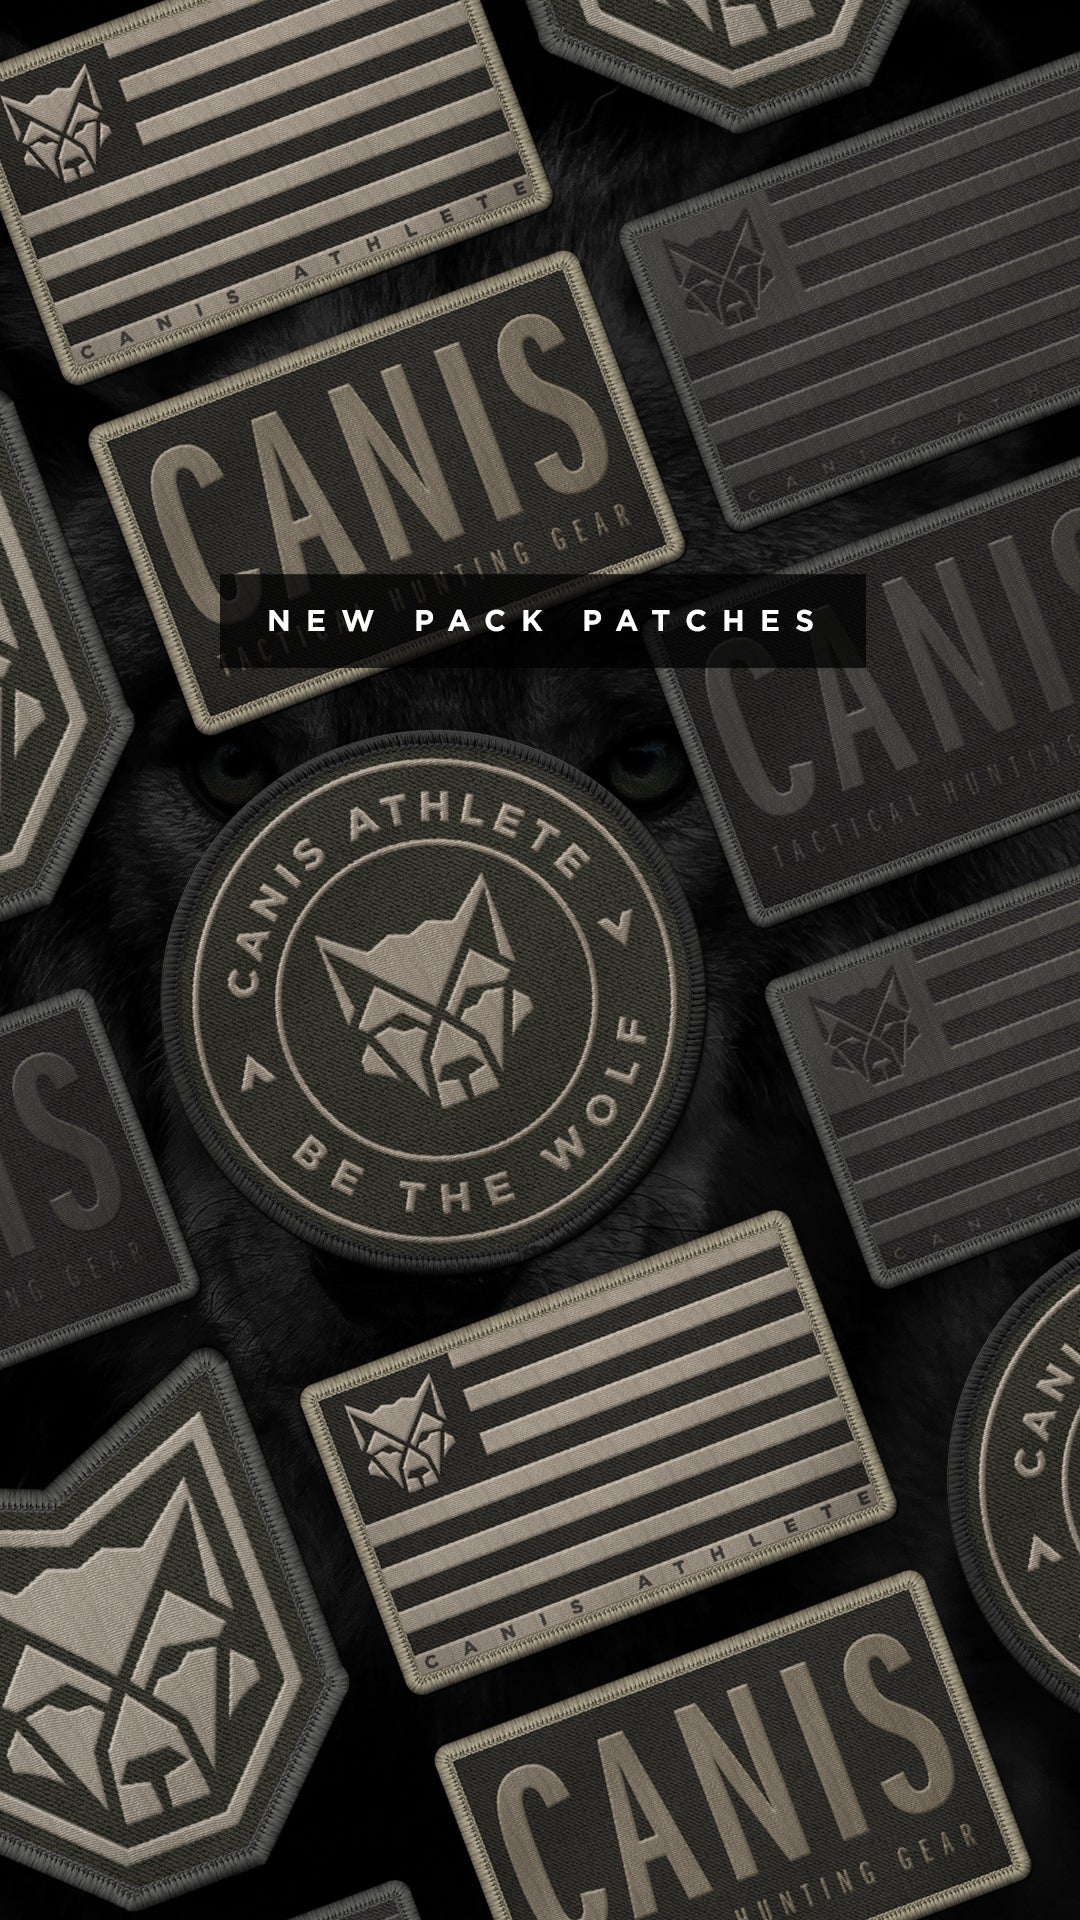 CANIS Black Flag Patch